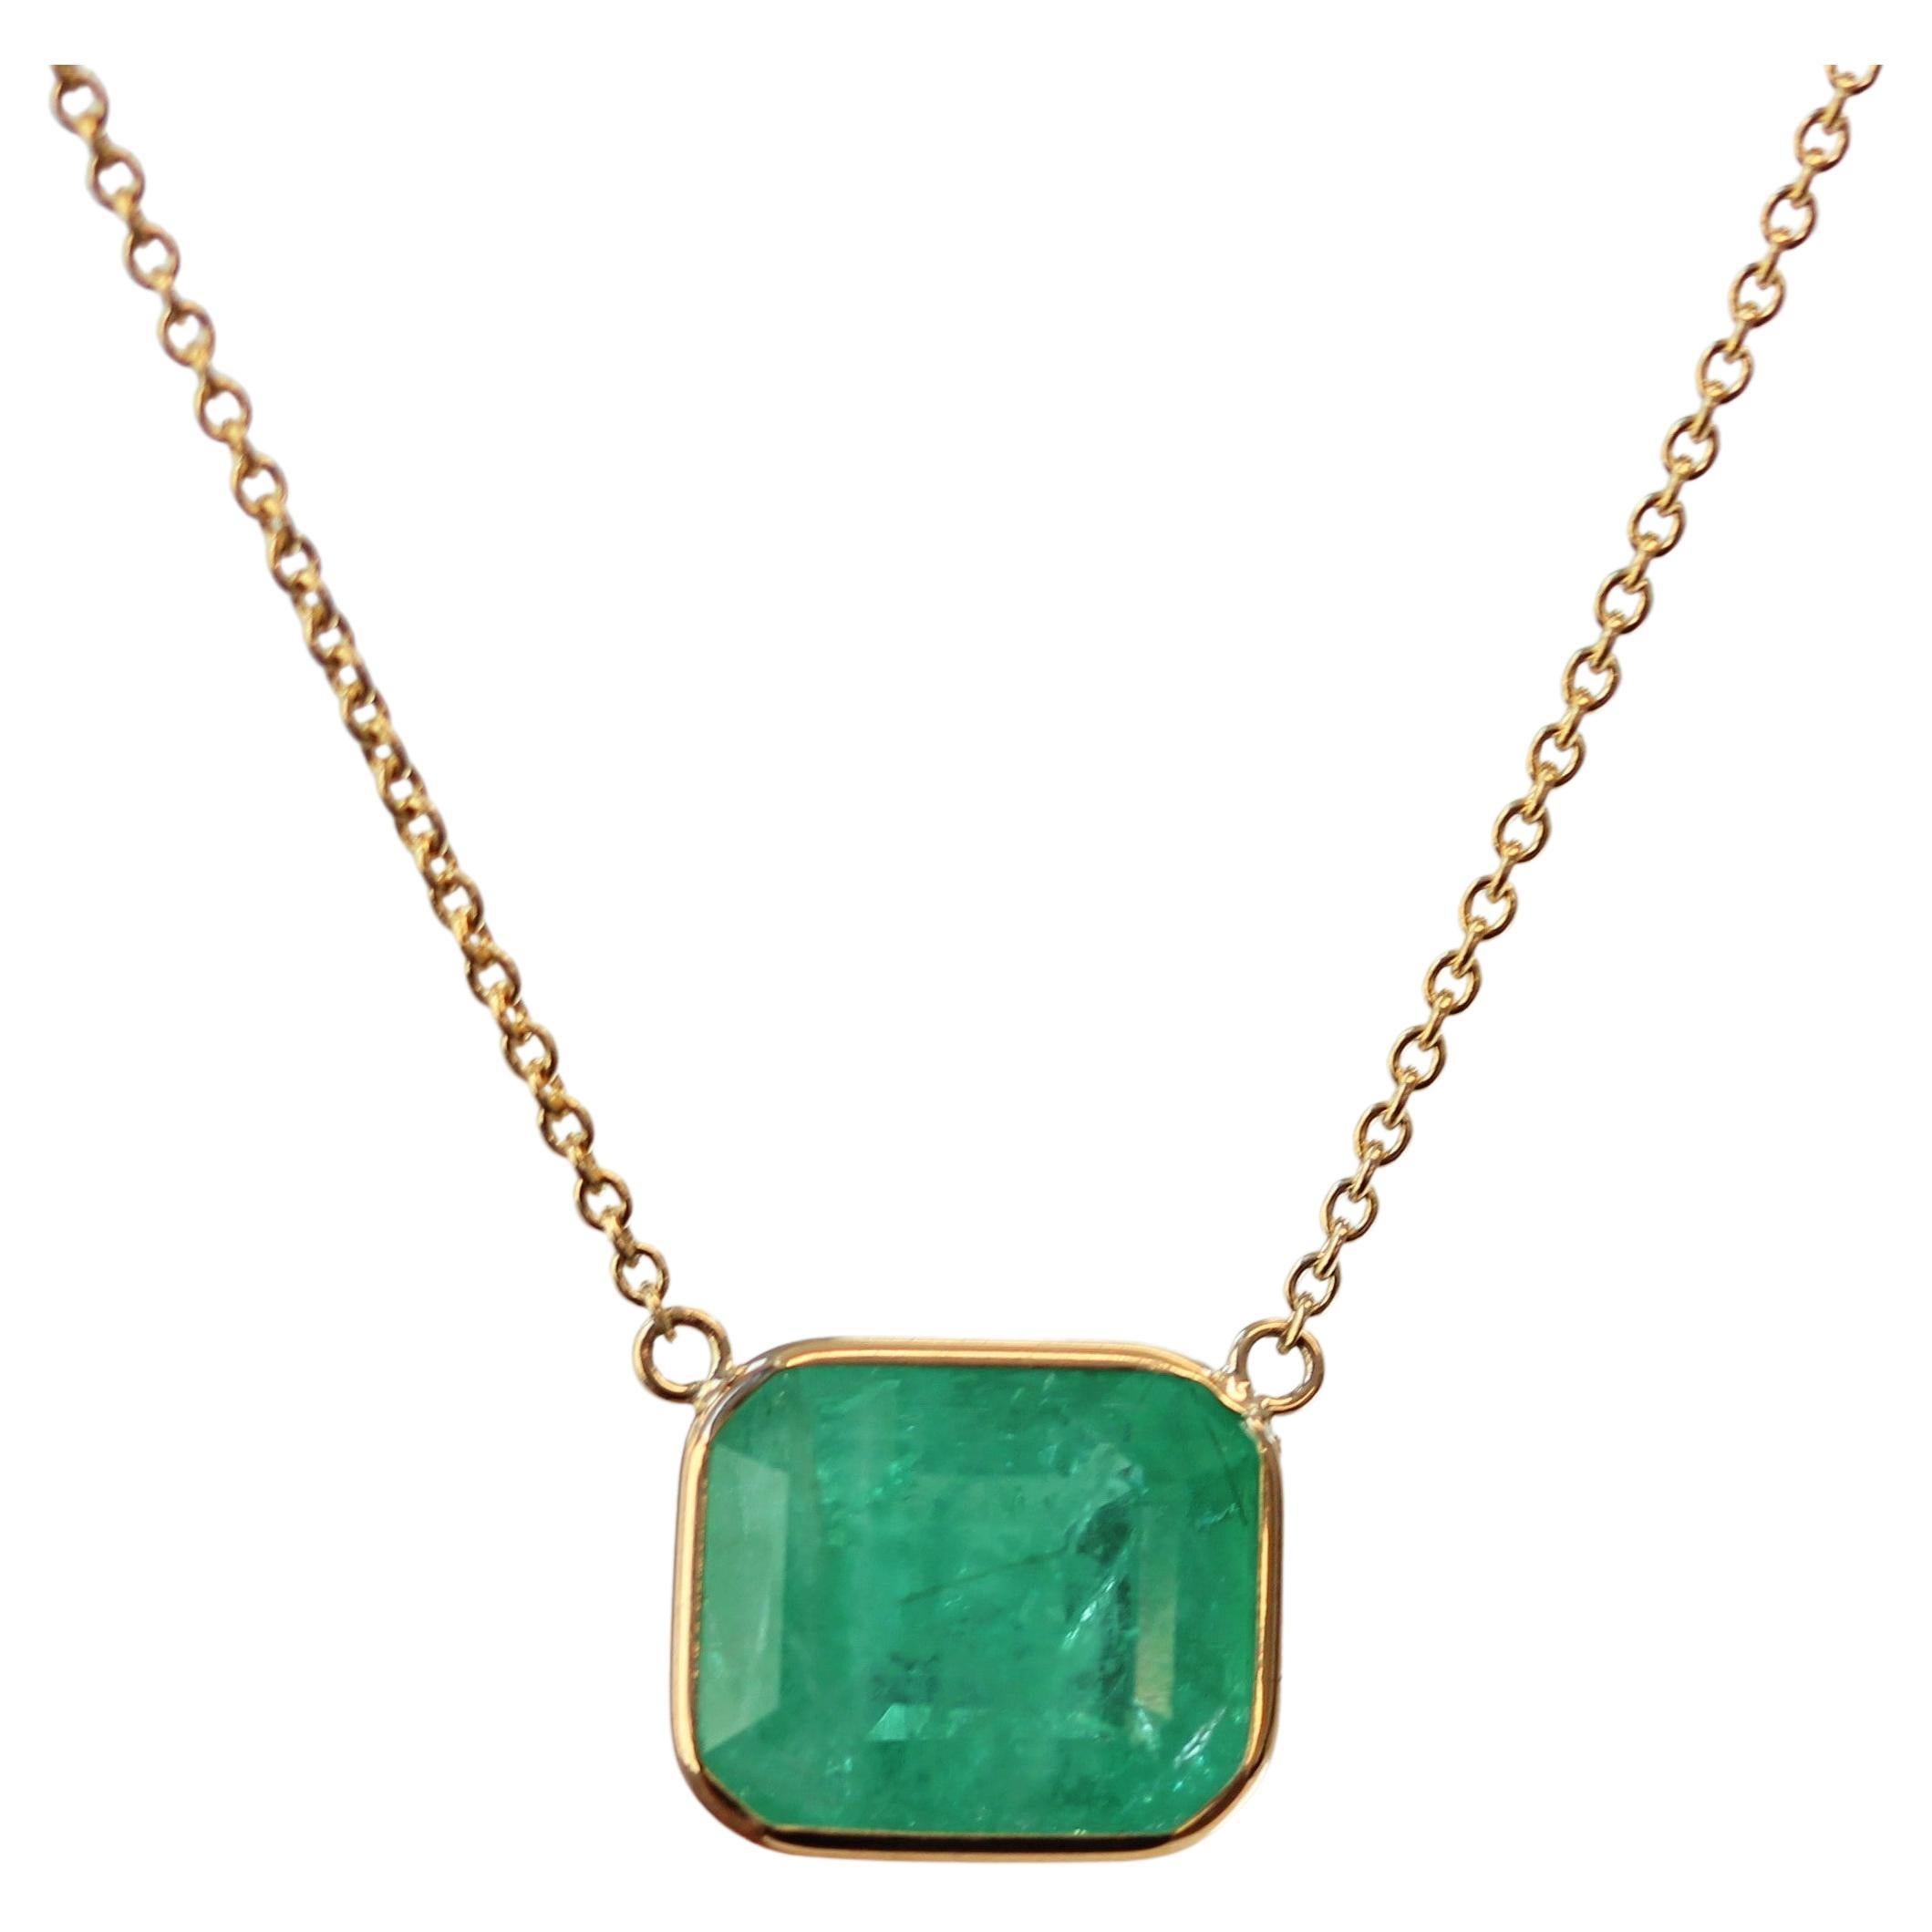 6.03 Carat Green Emerald Delicate Handmade Solitaire Necklace In 14k Yellow Gold For Sale